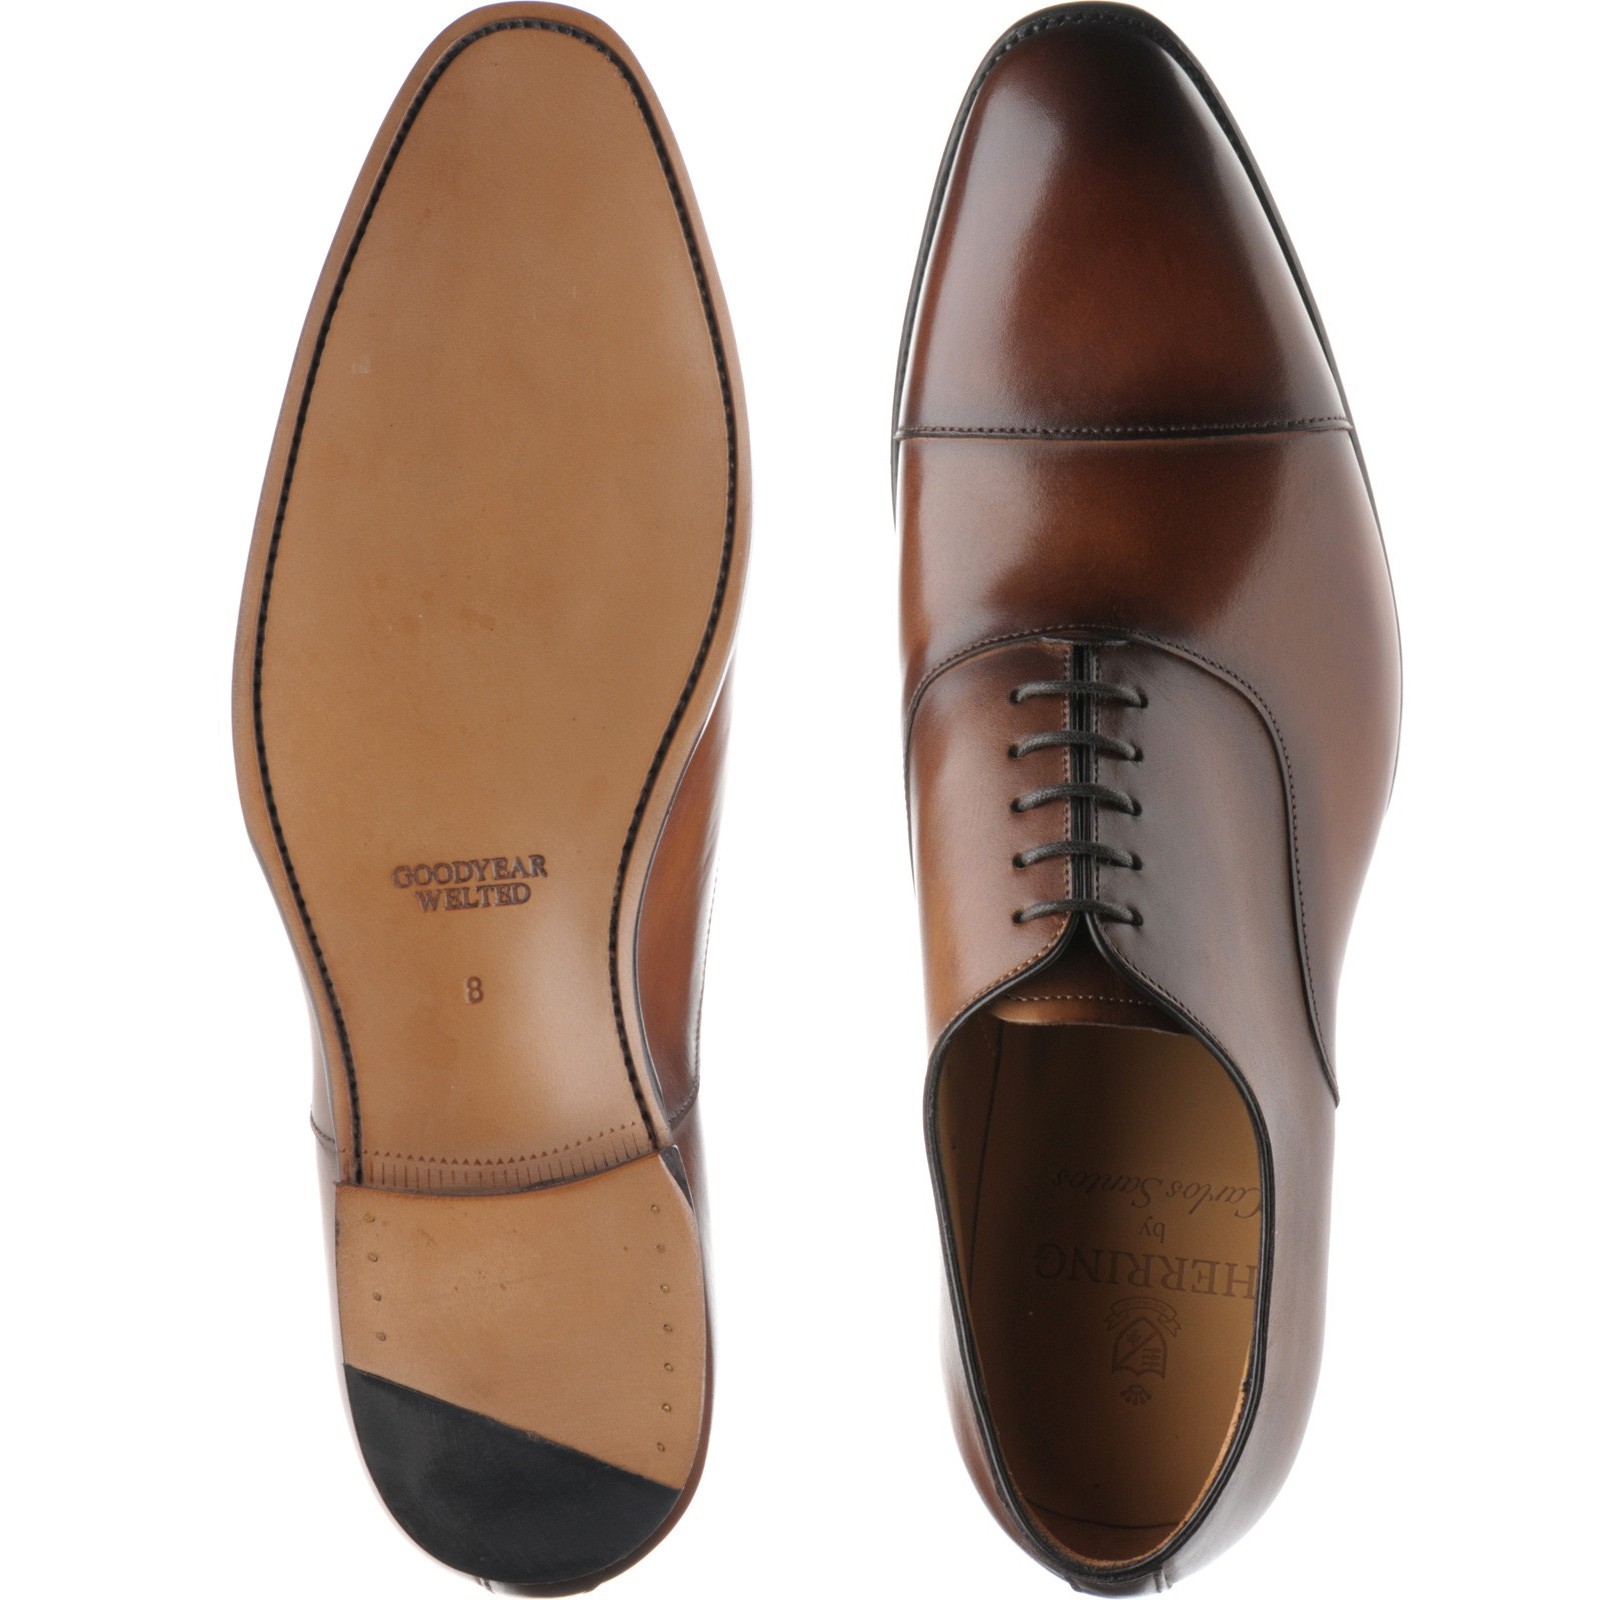 Herring shoes | Herring Classic | Dickens Oxfords in Tabacco Calf at ...